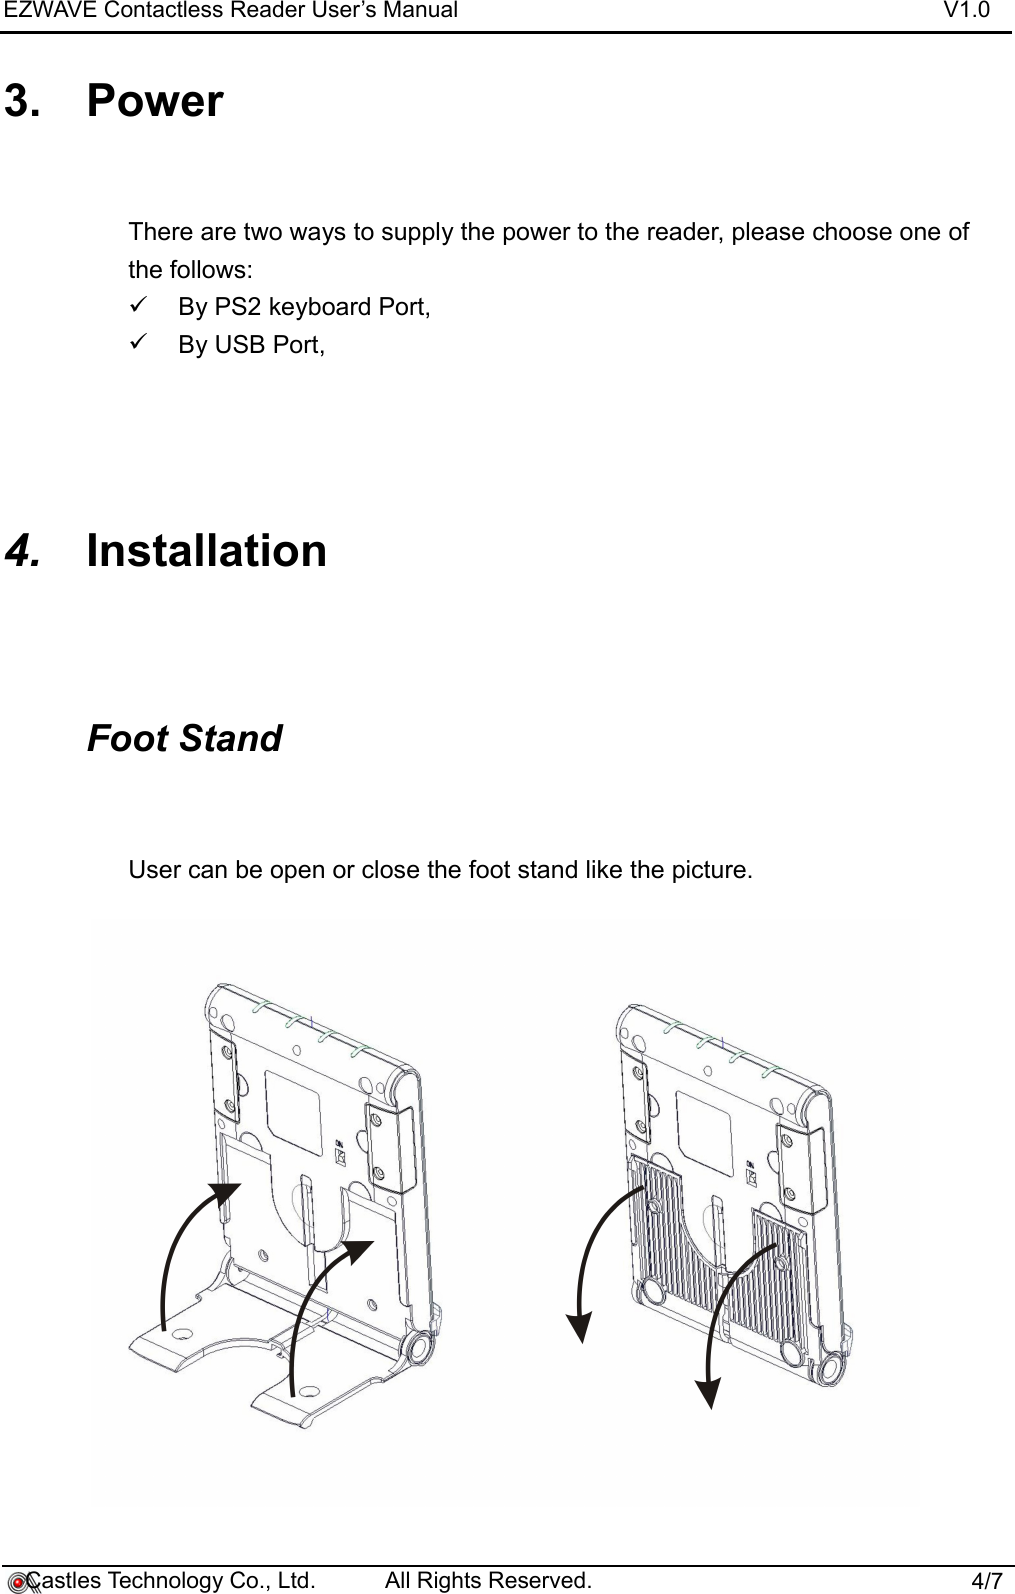 EZWAVE Contactless Reader User’s Manual V1.03. PowerThere are two ways to supply the power to the reader, please choose one of the follows:By PS2 keyboard Port, By USB Port,4. InstallationFoot StandUser can be open or close the foot stand like the picture.    Castles Technology Co., Ltd.           All Rights Reserved.                          4/7